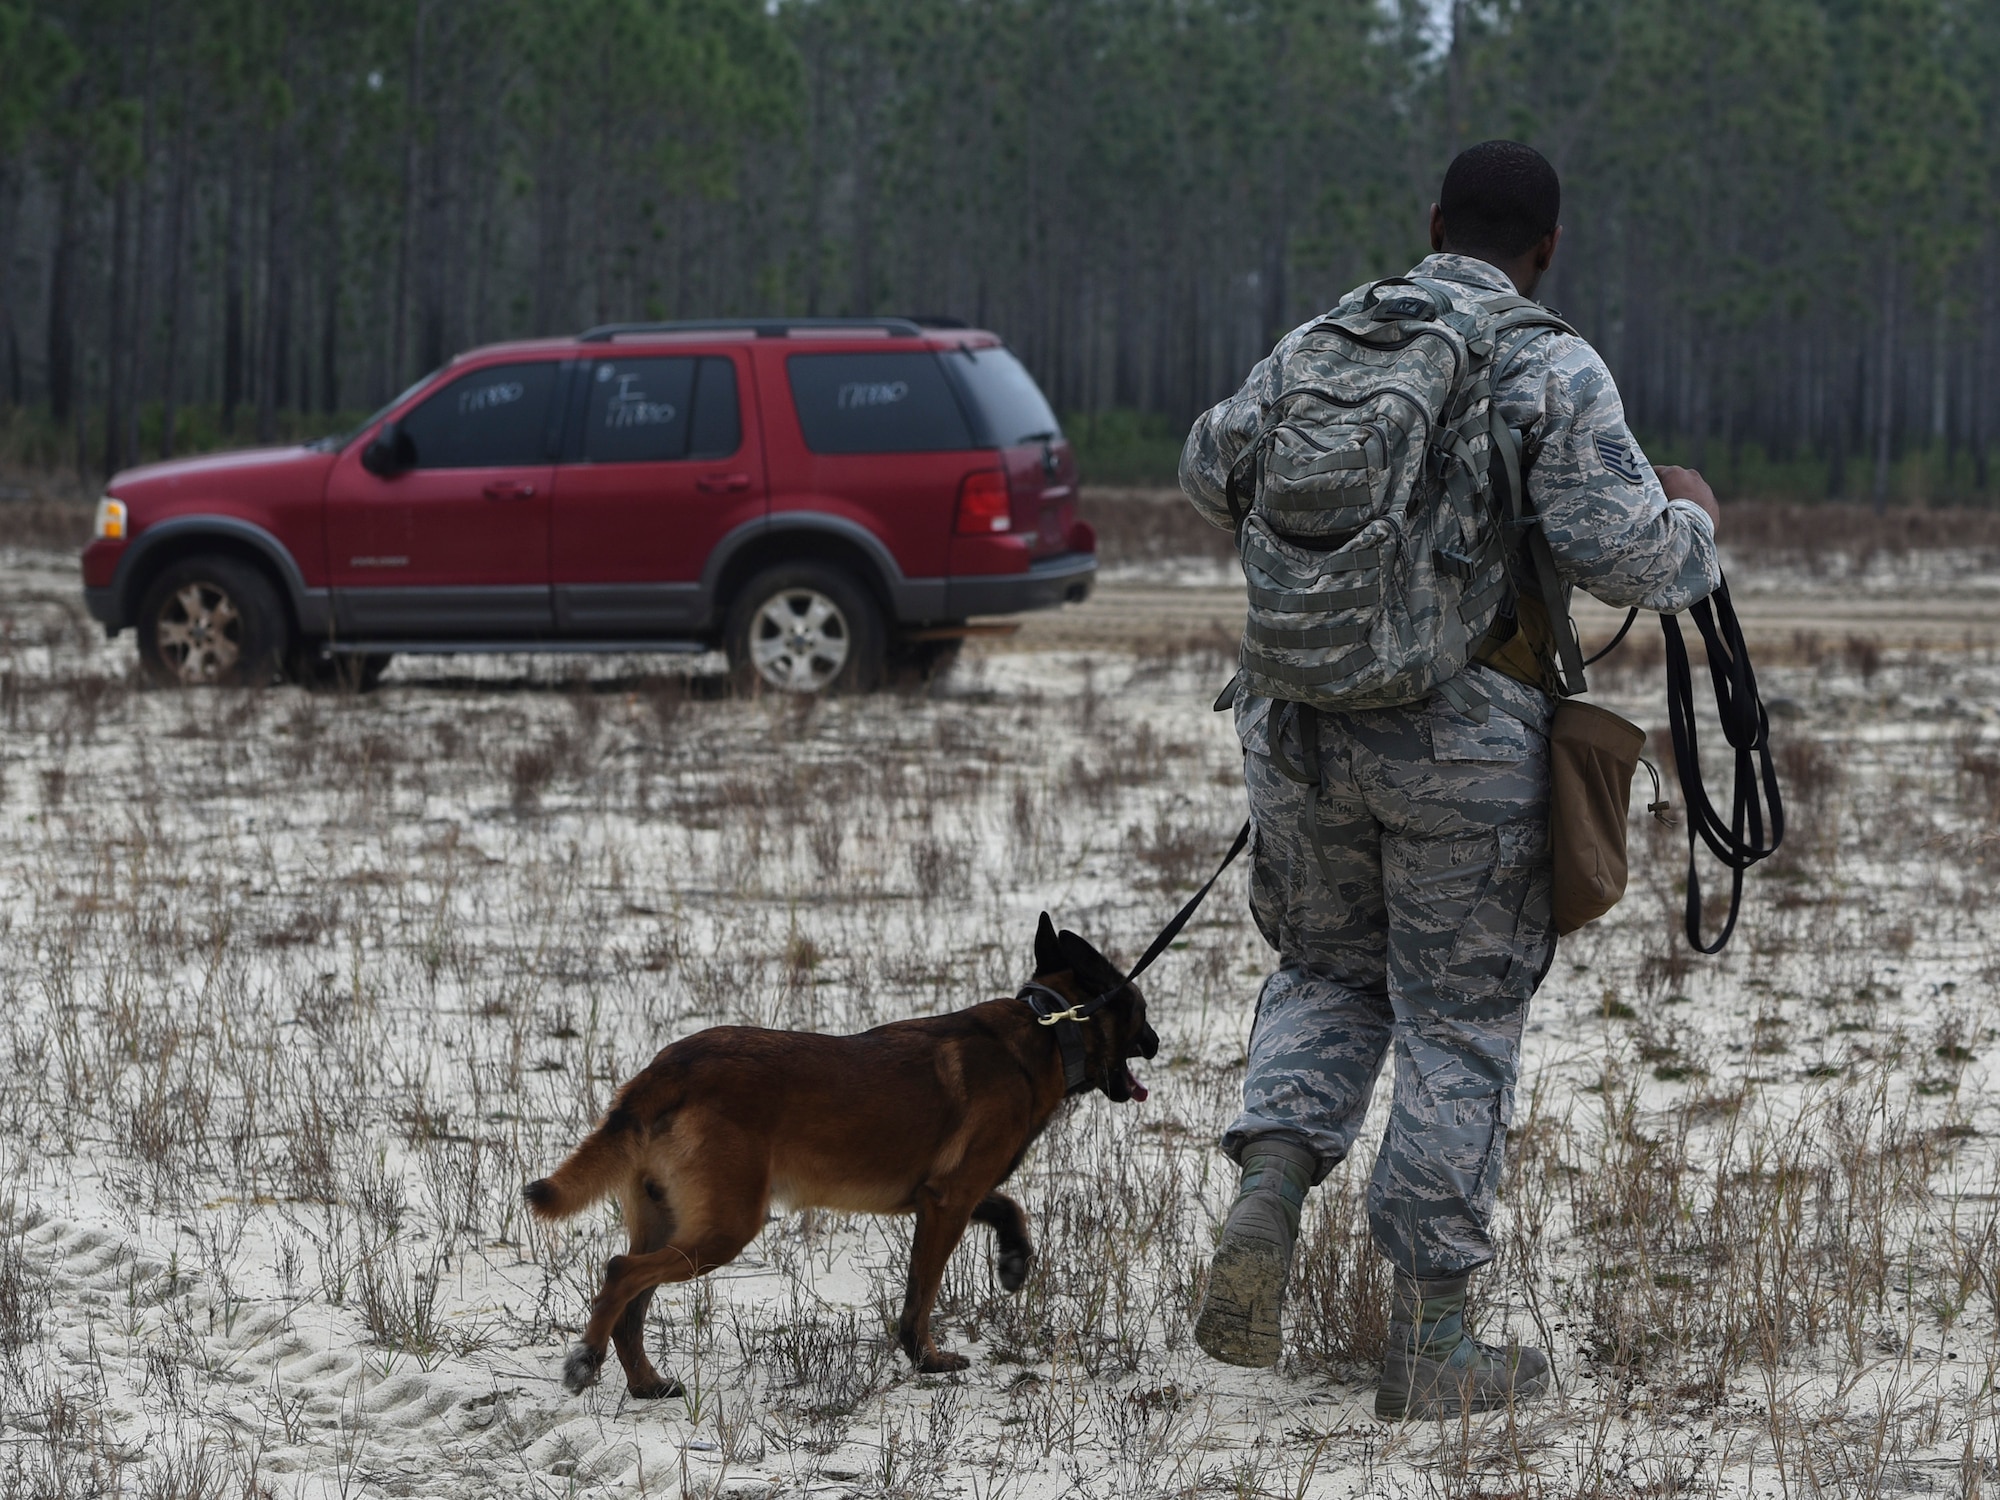 Security Forces Airman walks K-9 across sand/car in background